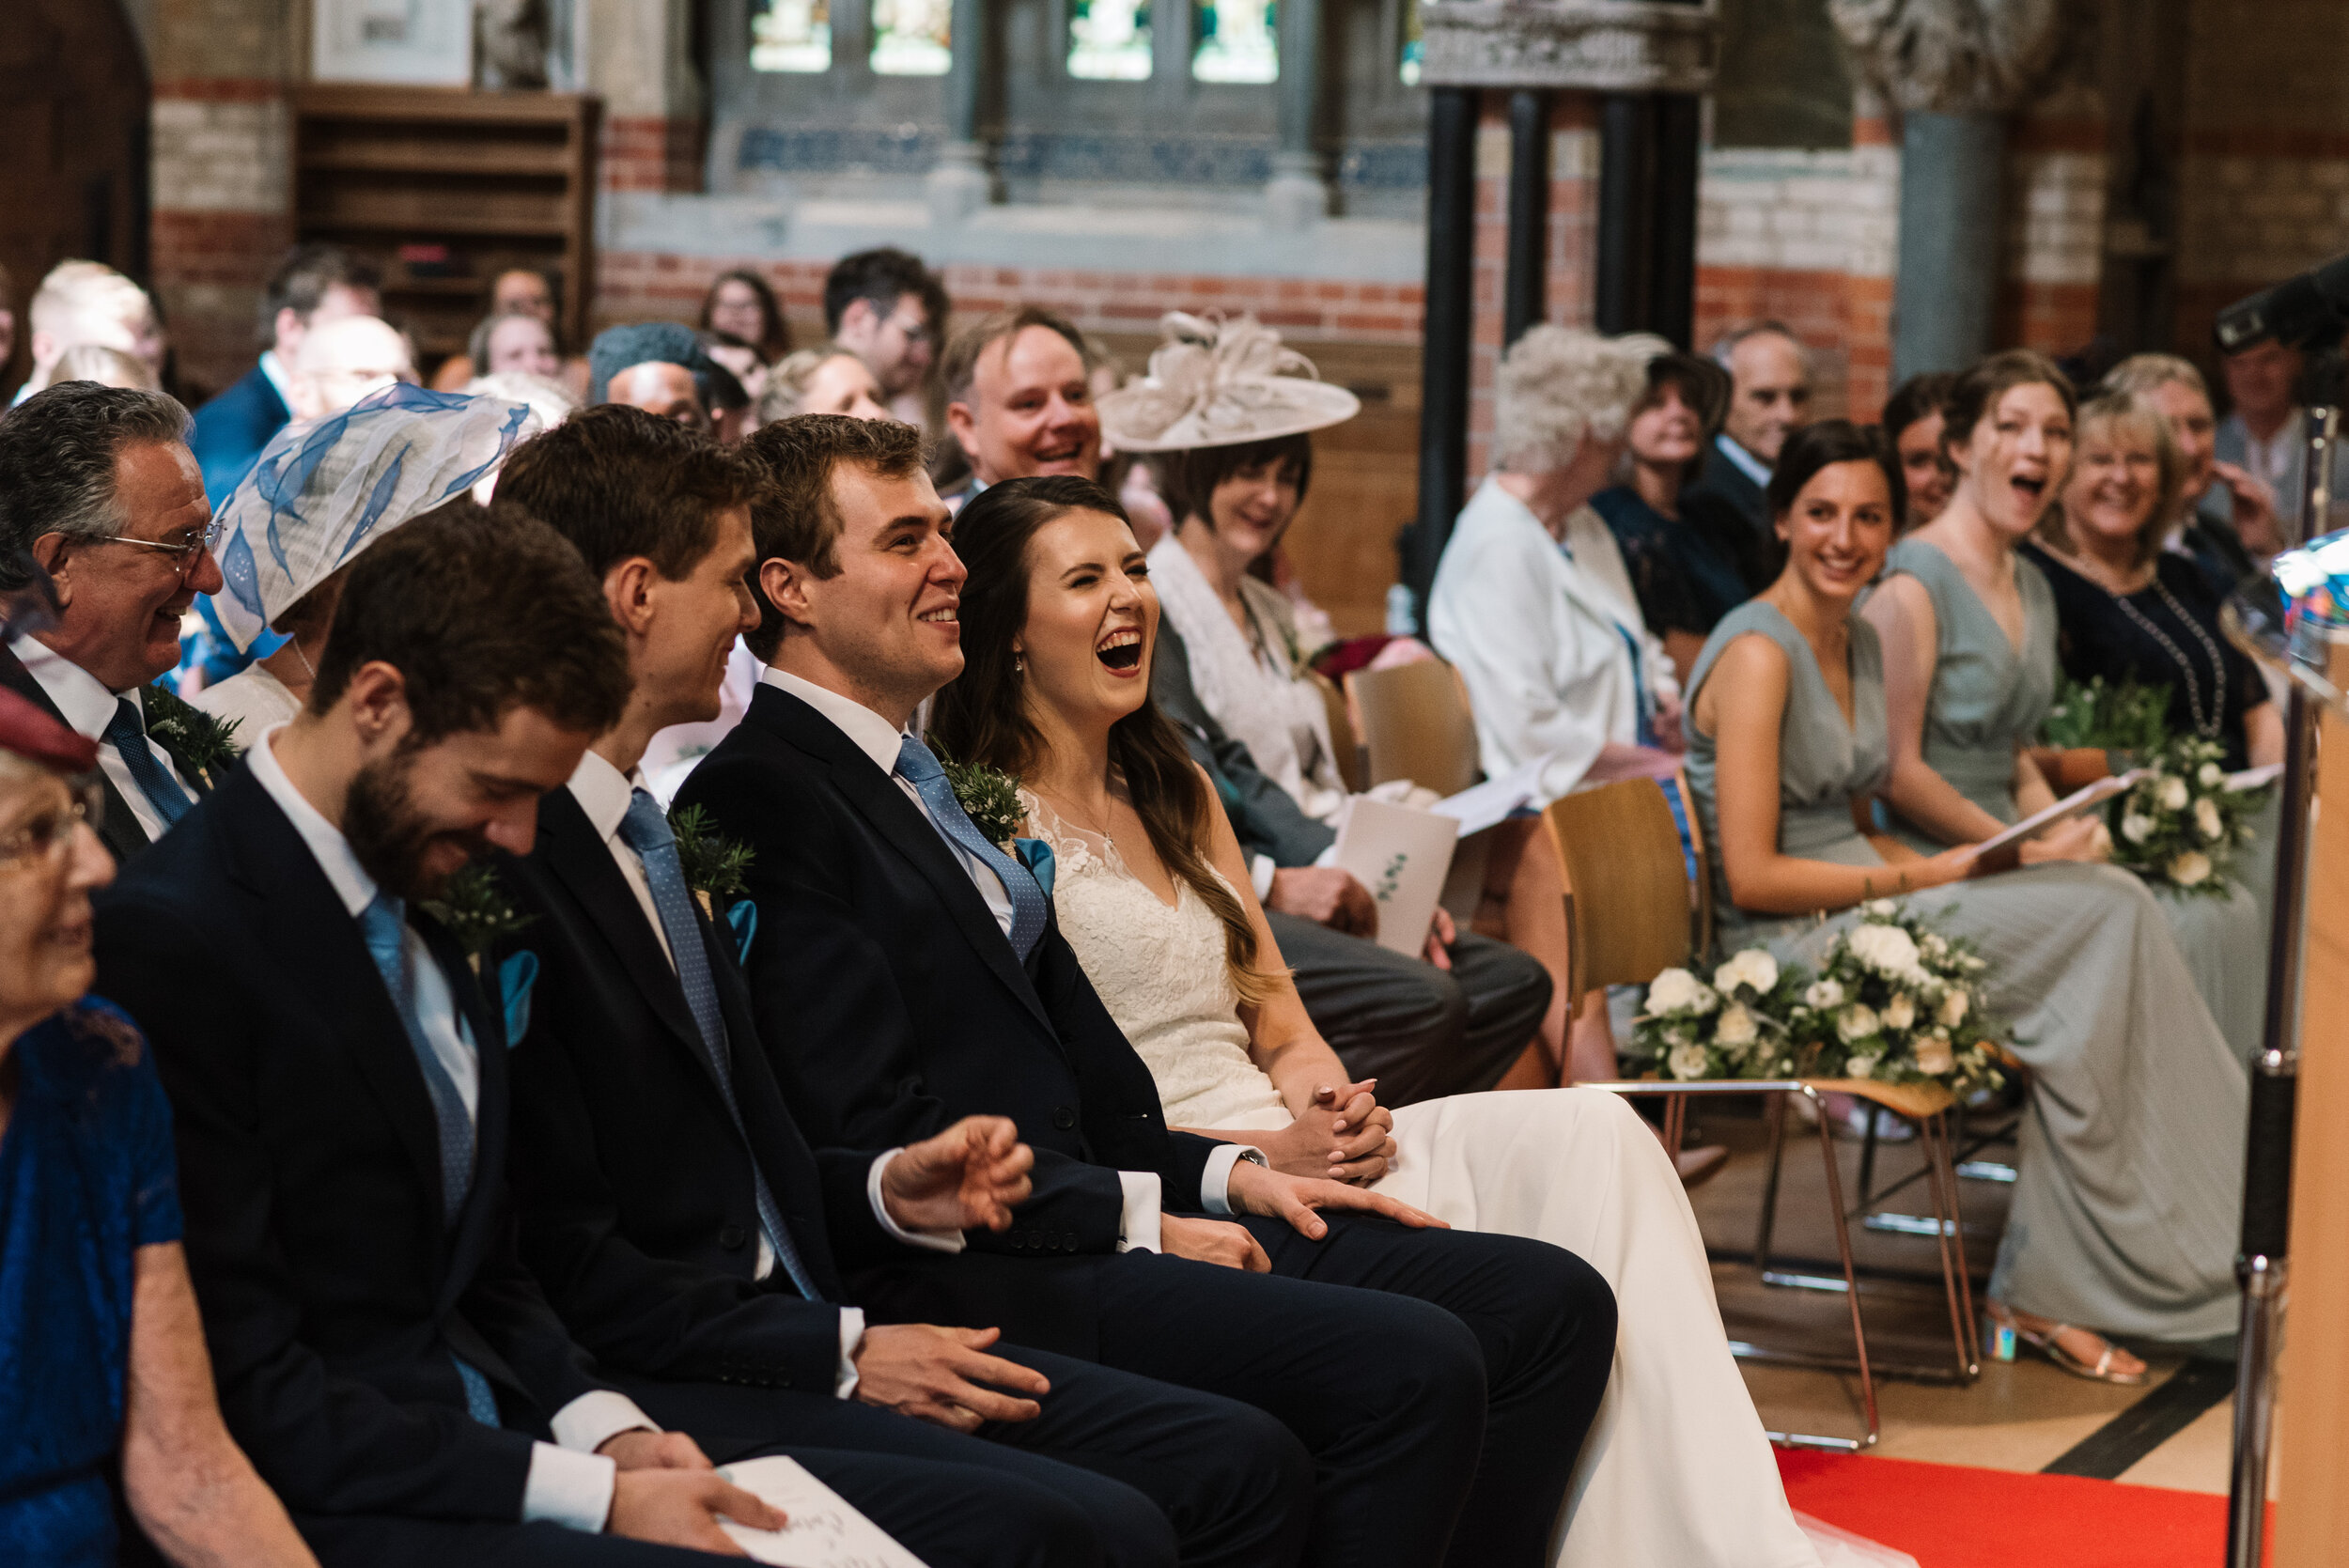 Bride and groom seated at front of church and laughing